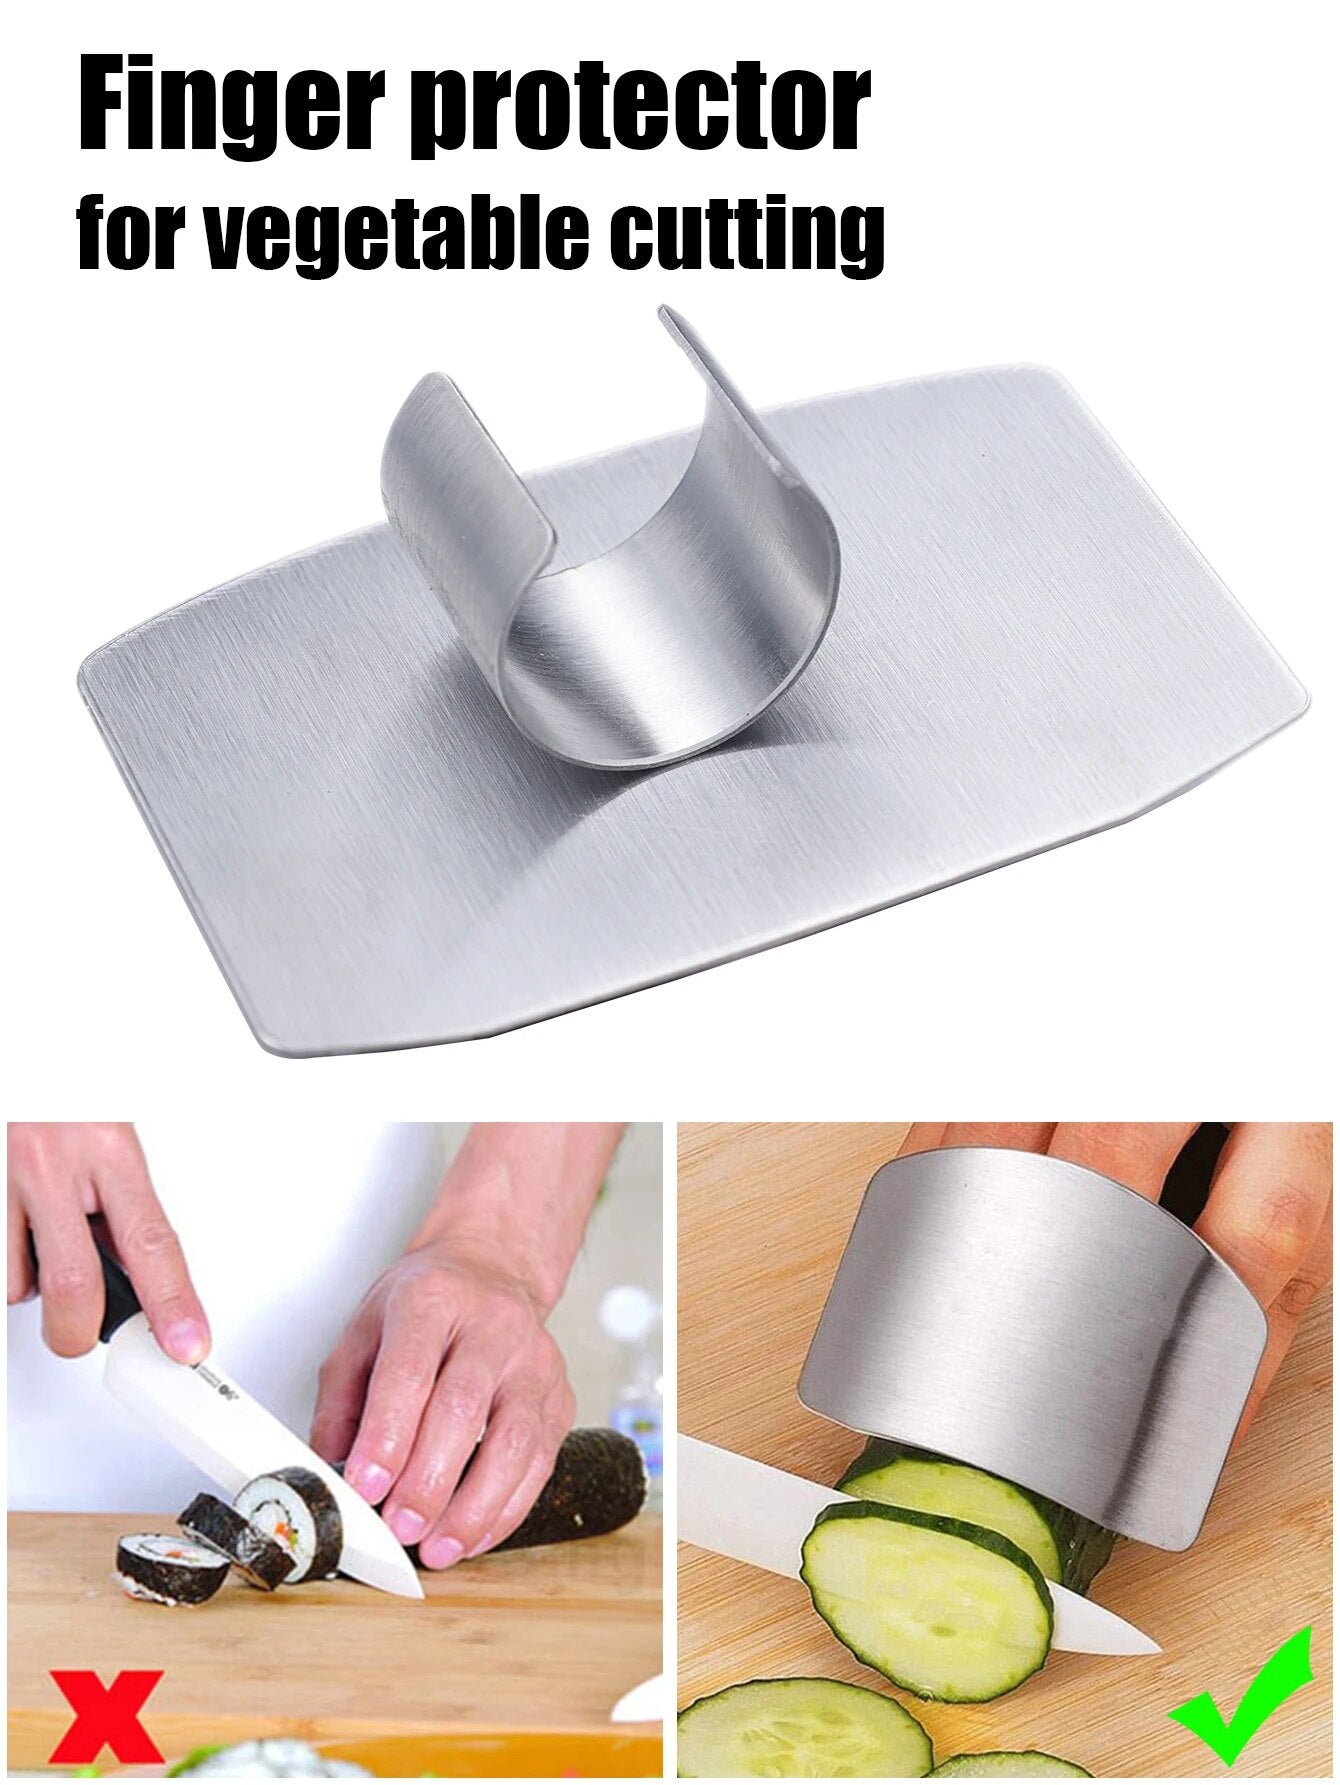 Safety finger guard, Stainless steel protector, Anti-cut kitchen tool, Durable hand shield, Vegetable cutting safety, Knife blade protector, Ergonomic finger guard, Essential kitchen gadget, Hygienic cutting aid, Home finger protection.